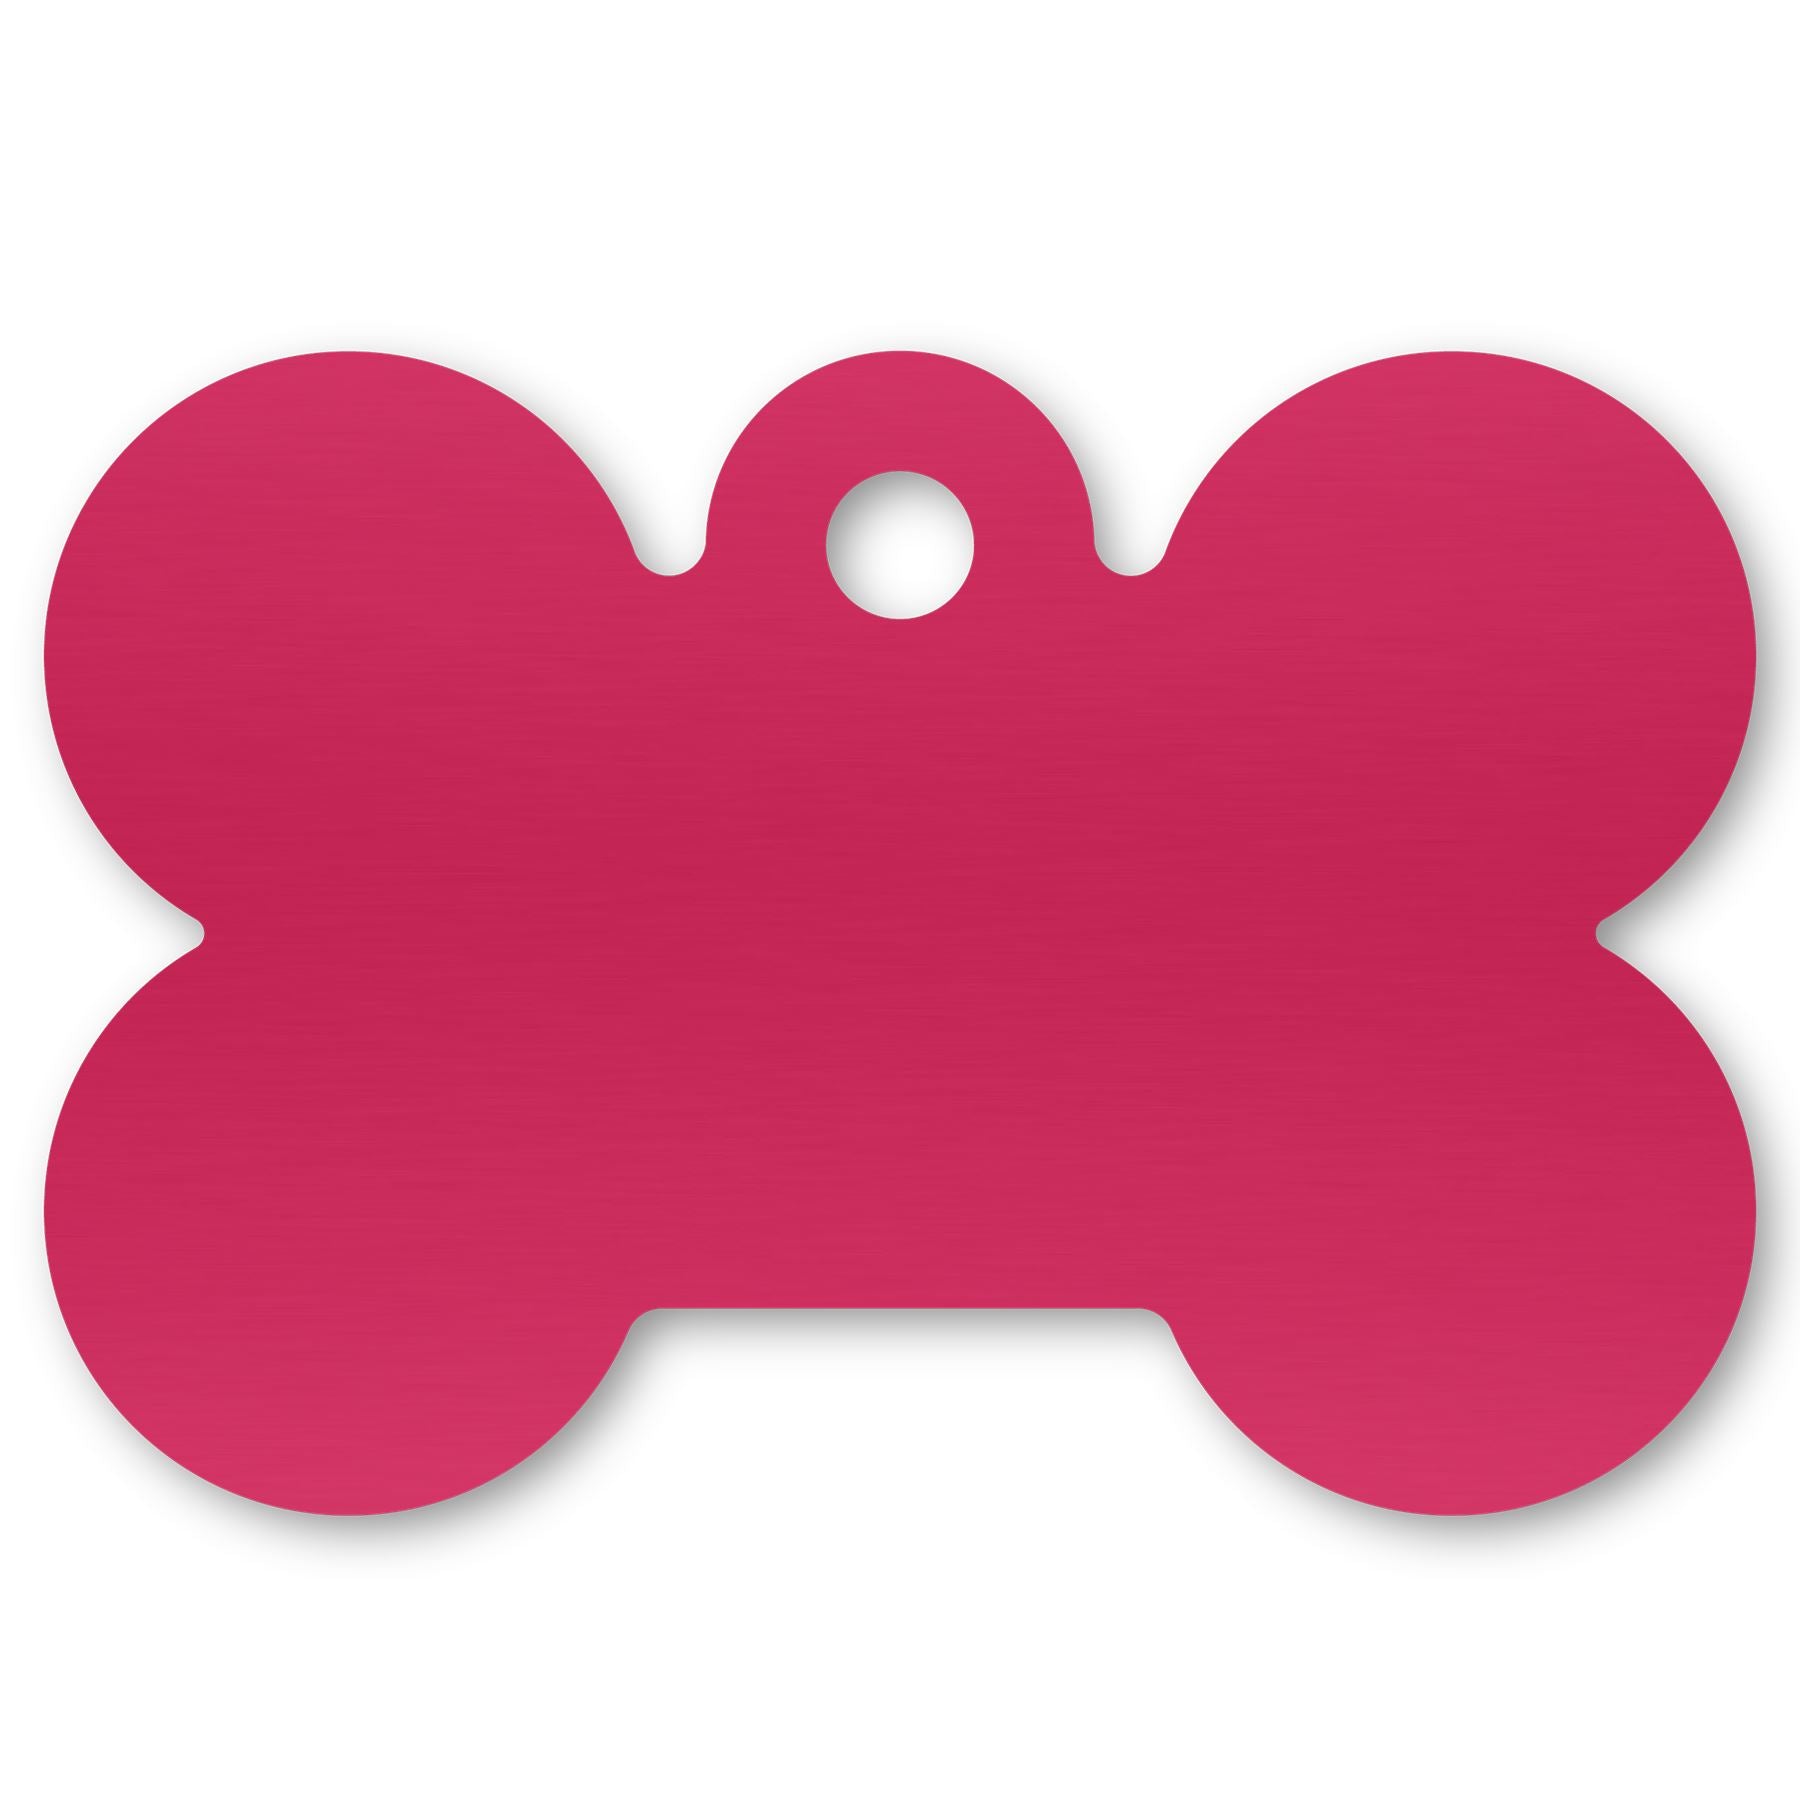 Anodized Aluminum Dog Bone Shaped Tags, 1-3/8" x 2-1/16" with 1/8" Hole, Laser Engraved Metal Tags Craftworks NW Pink 